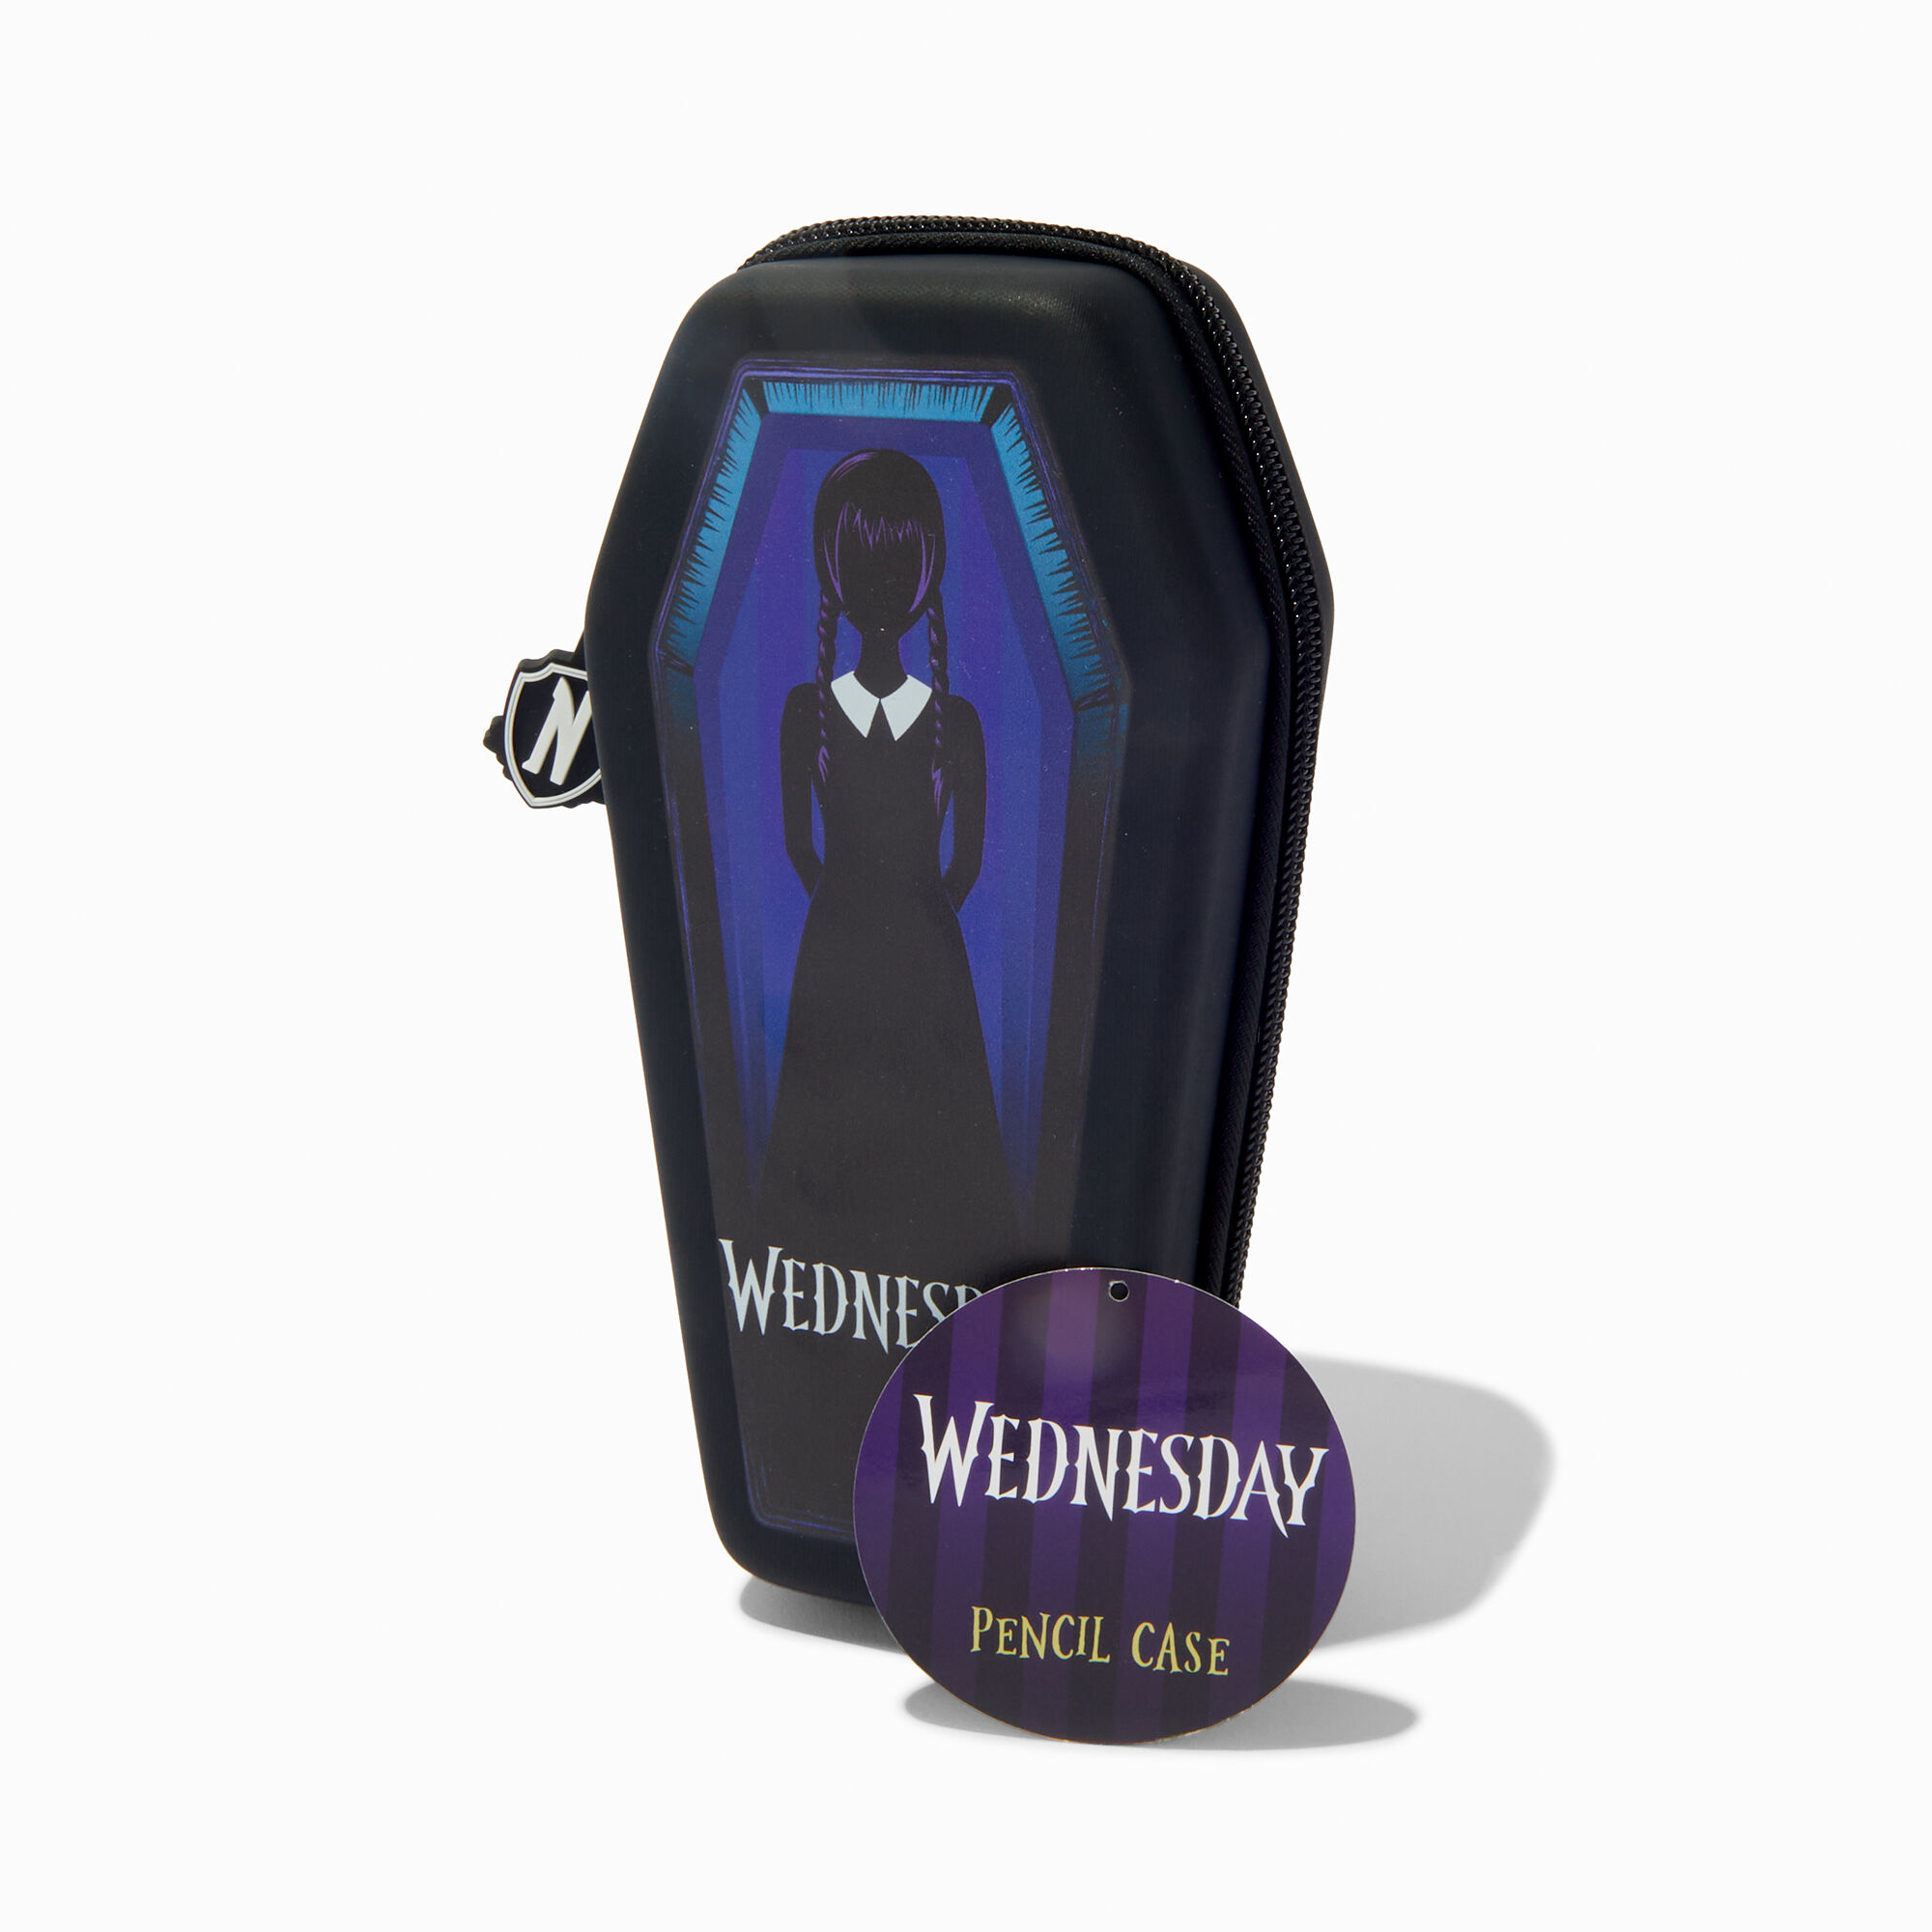 View Claires Wednesday Coffin Pencil Case information